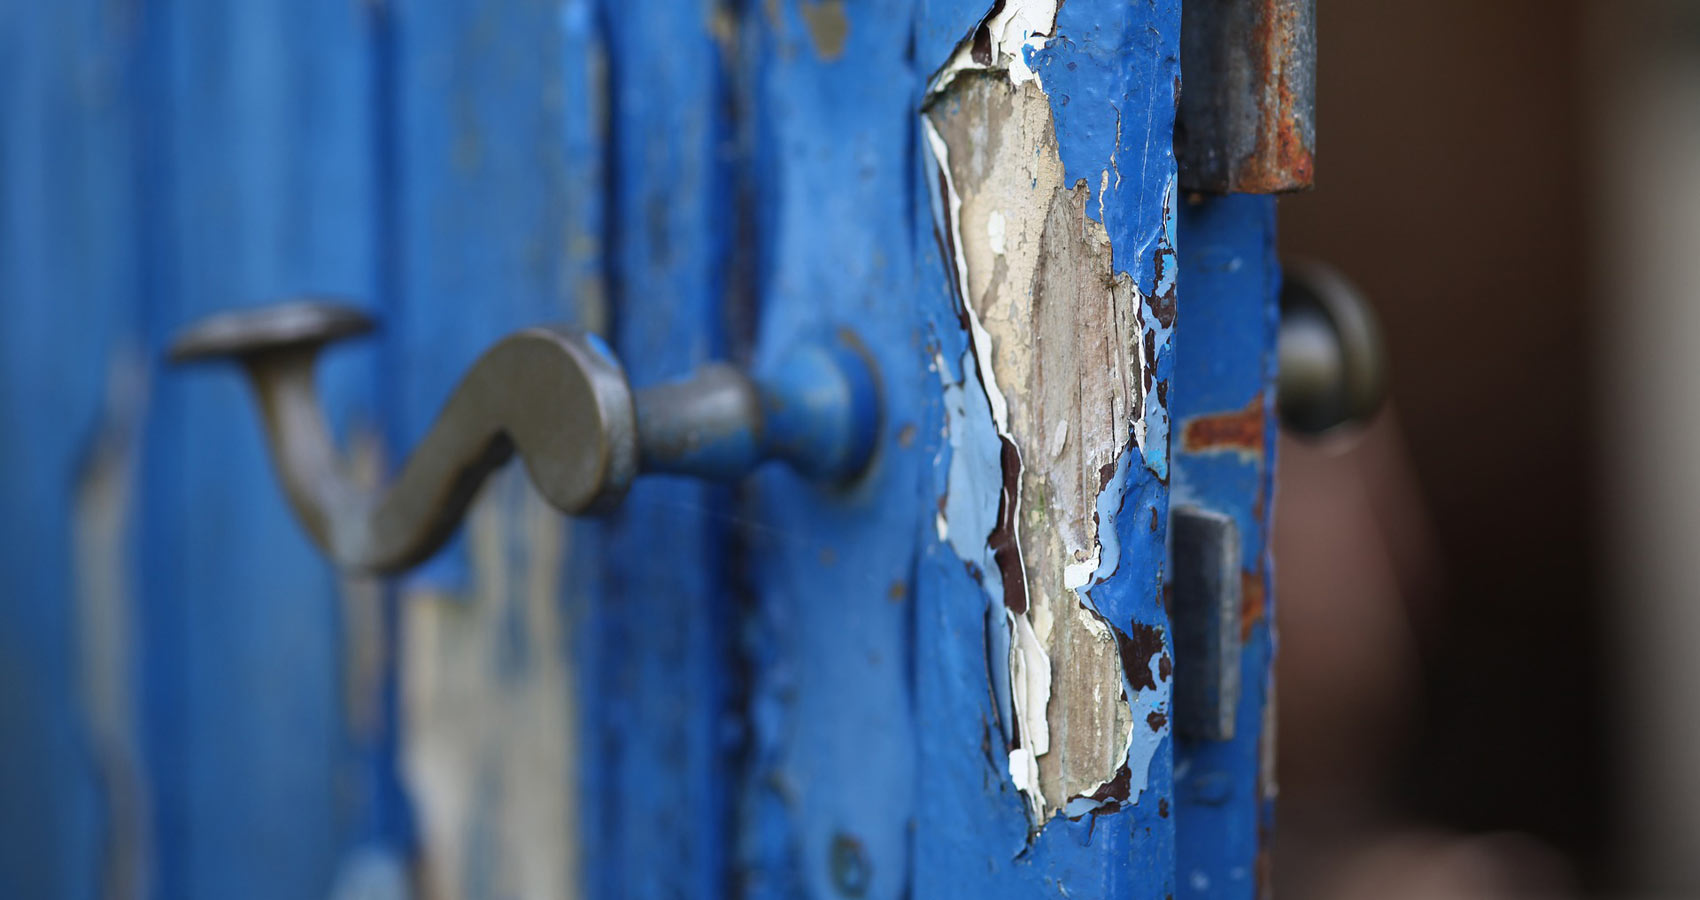 Leaving Blue Doors, poetry by Joni Caggiano at Spillwords.com